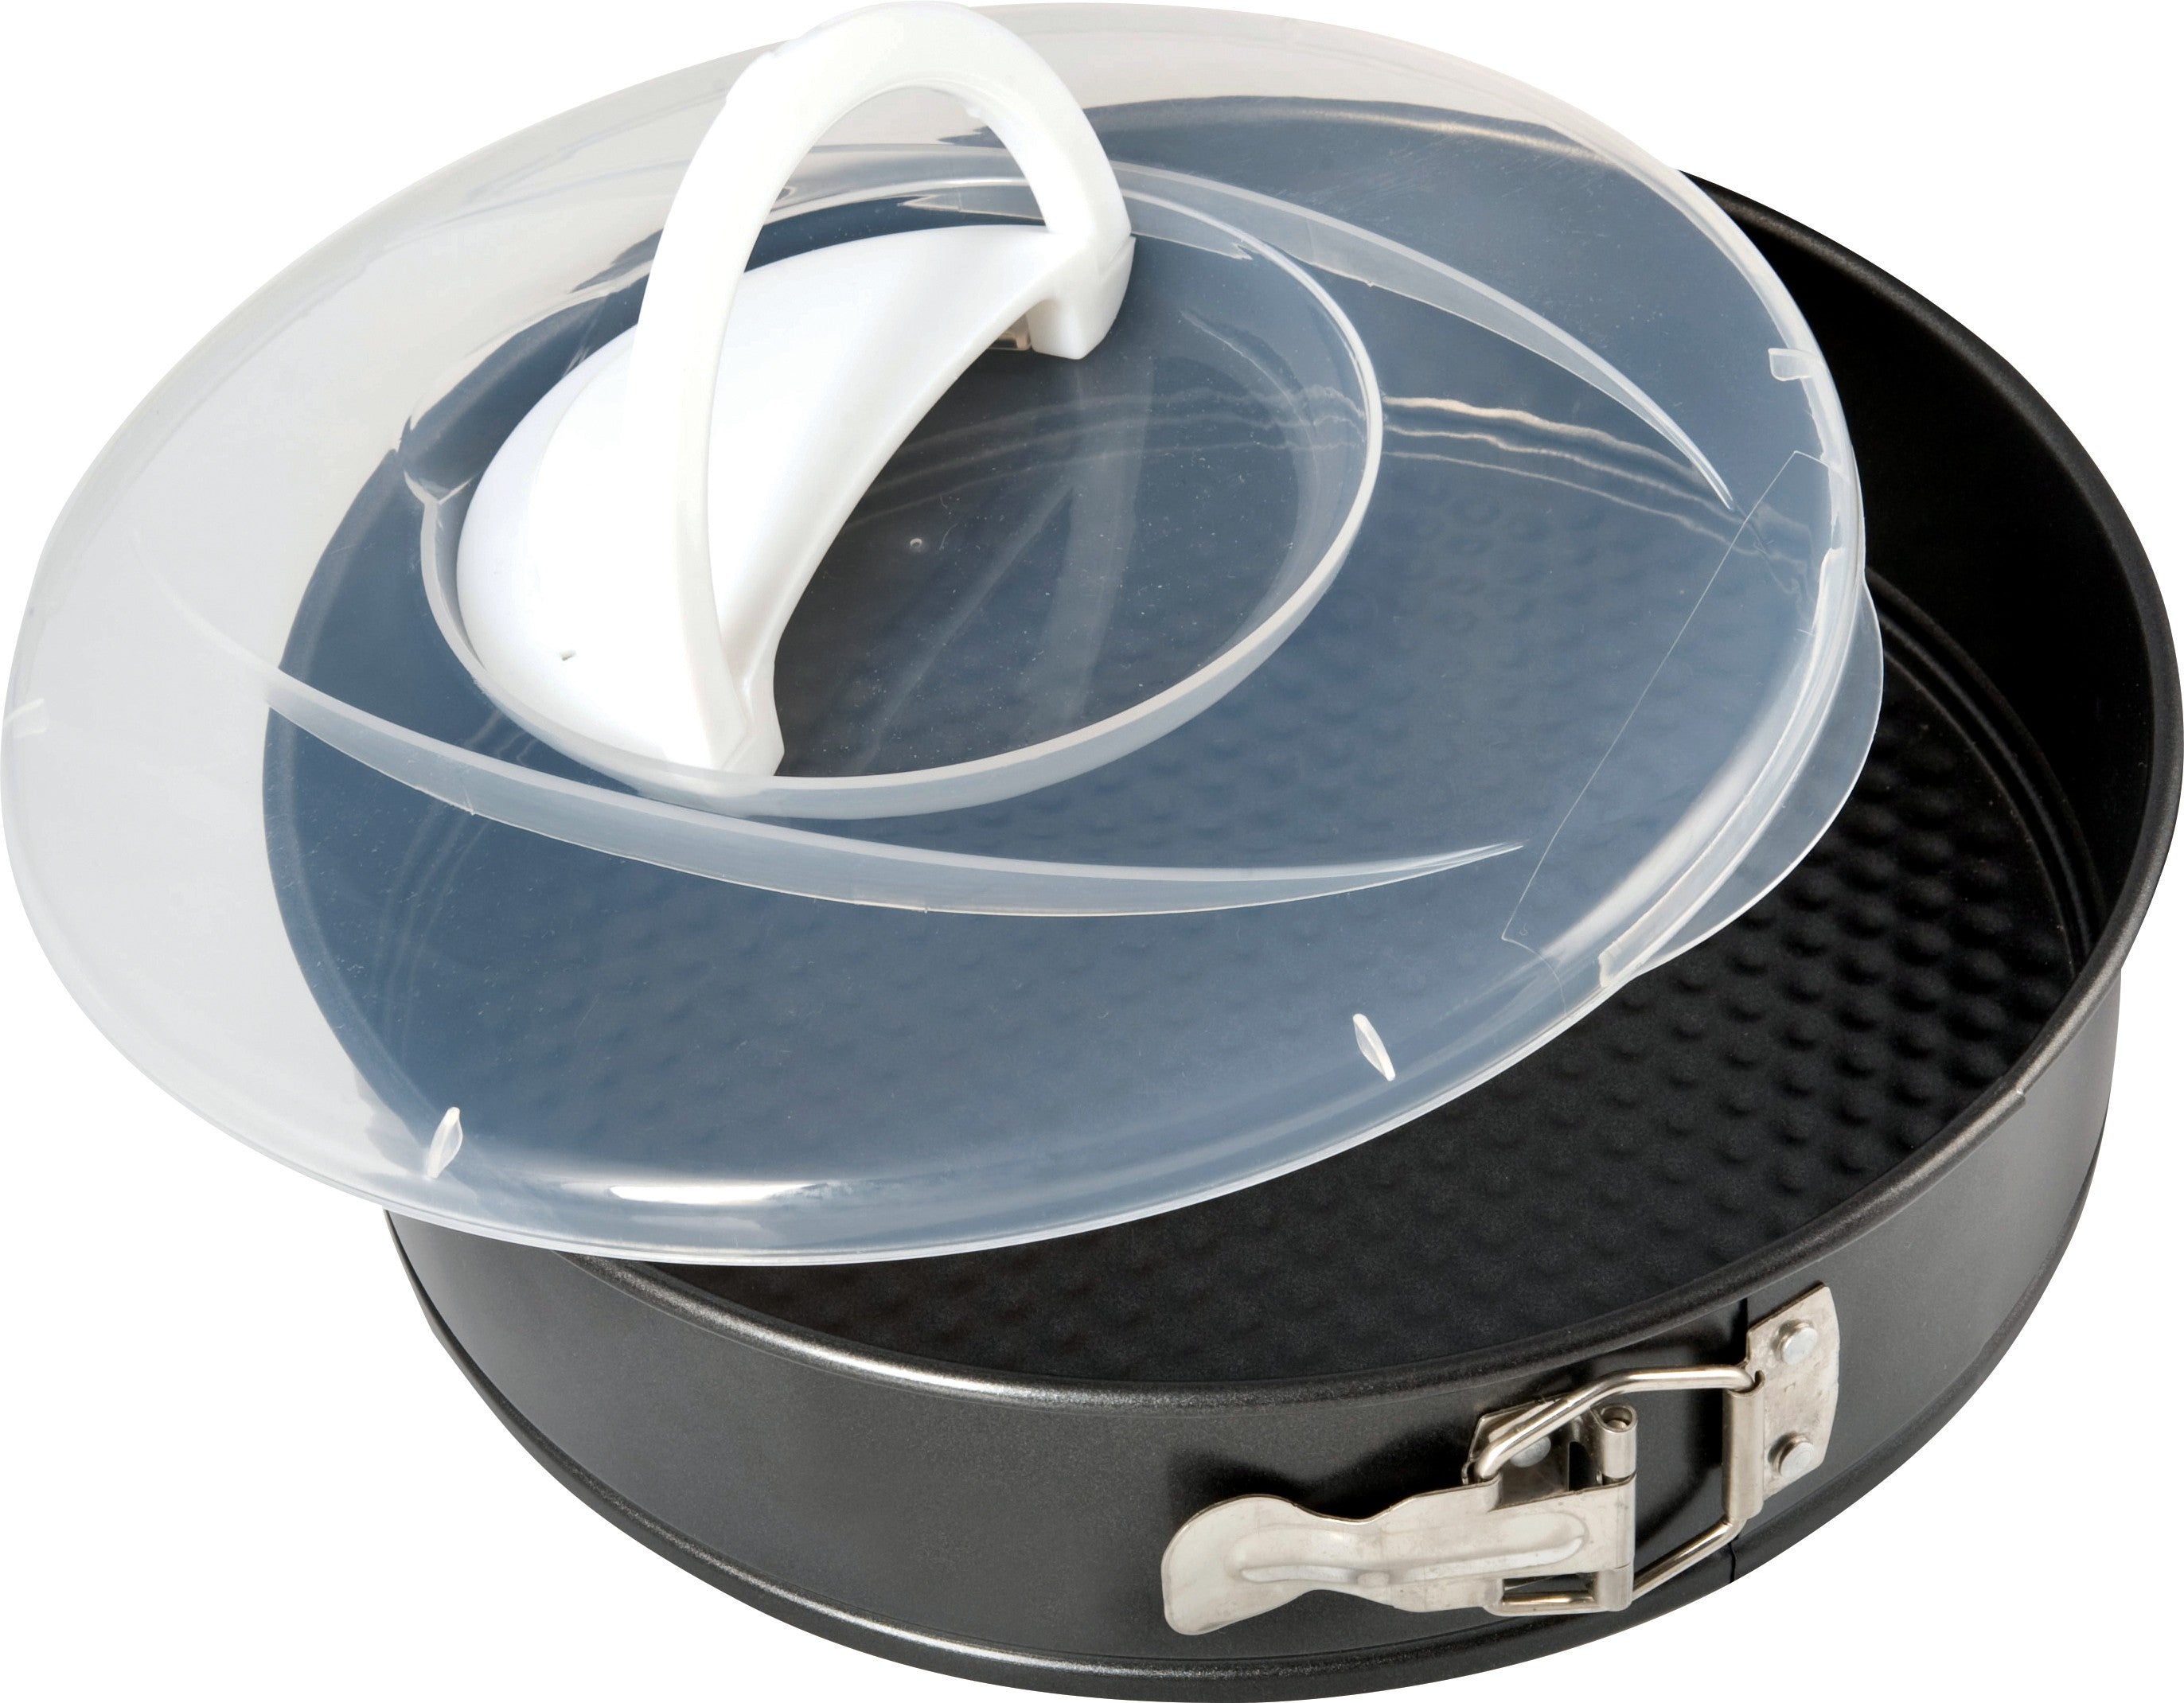 10-Inch Springform Pan with Lid